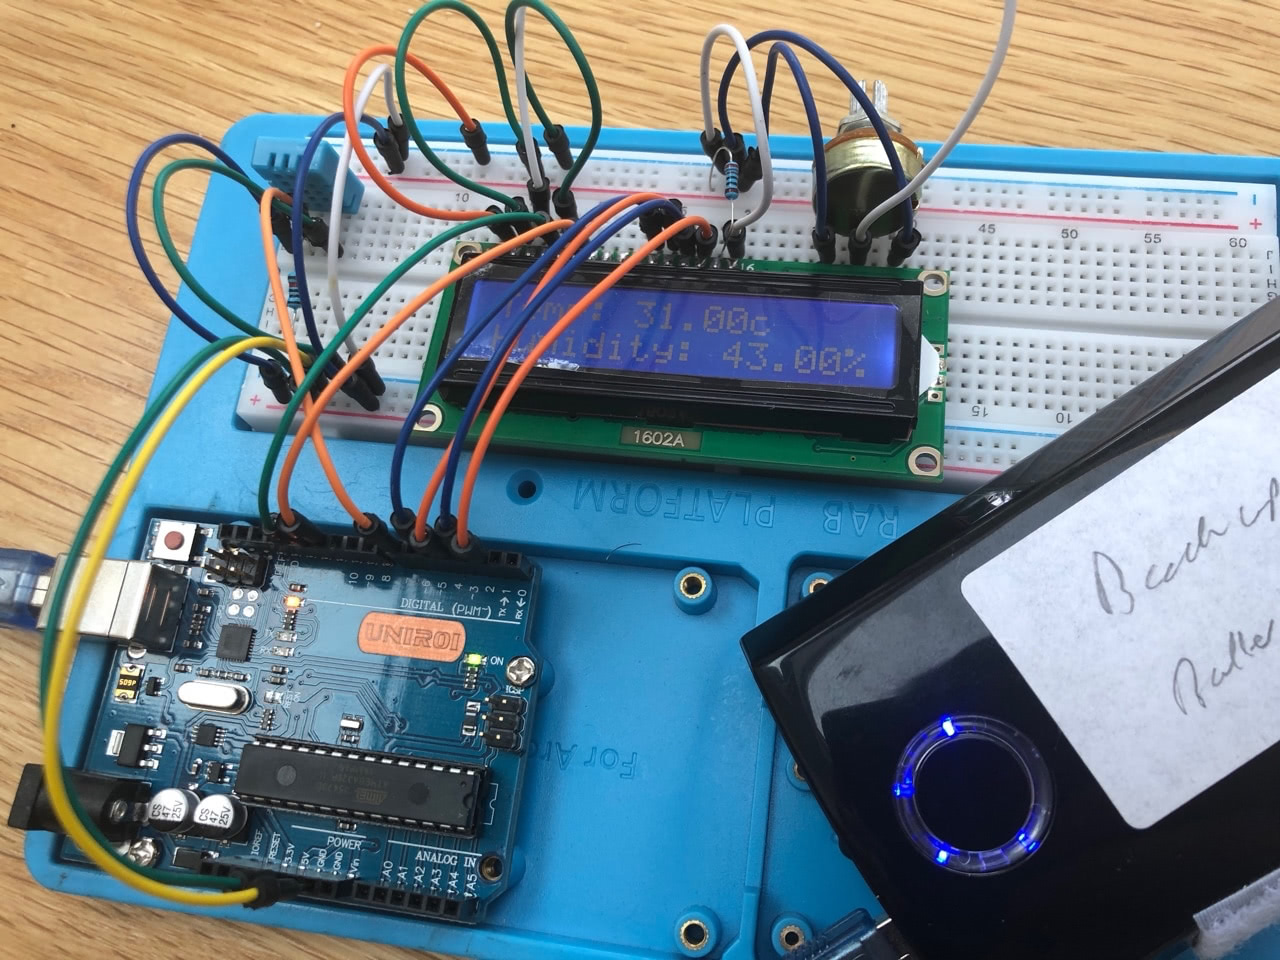 Breadboard with Arduino, DH-11 and LCD display showing the temperature & humidity